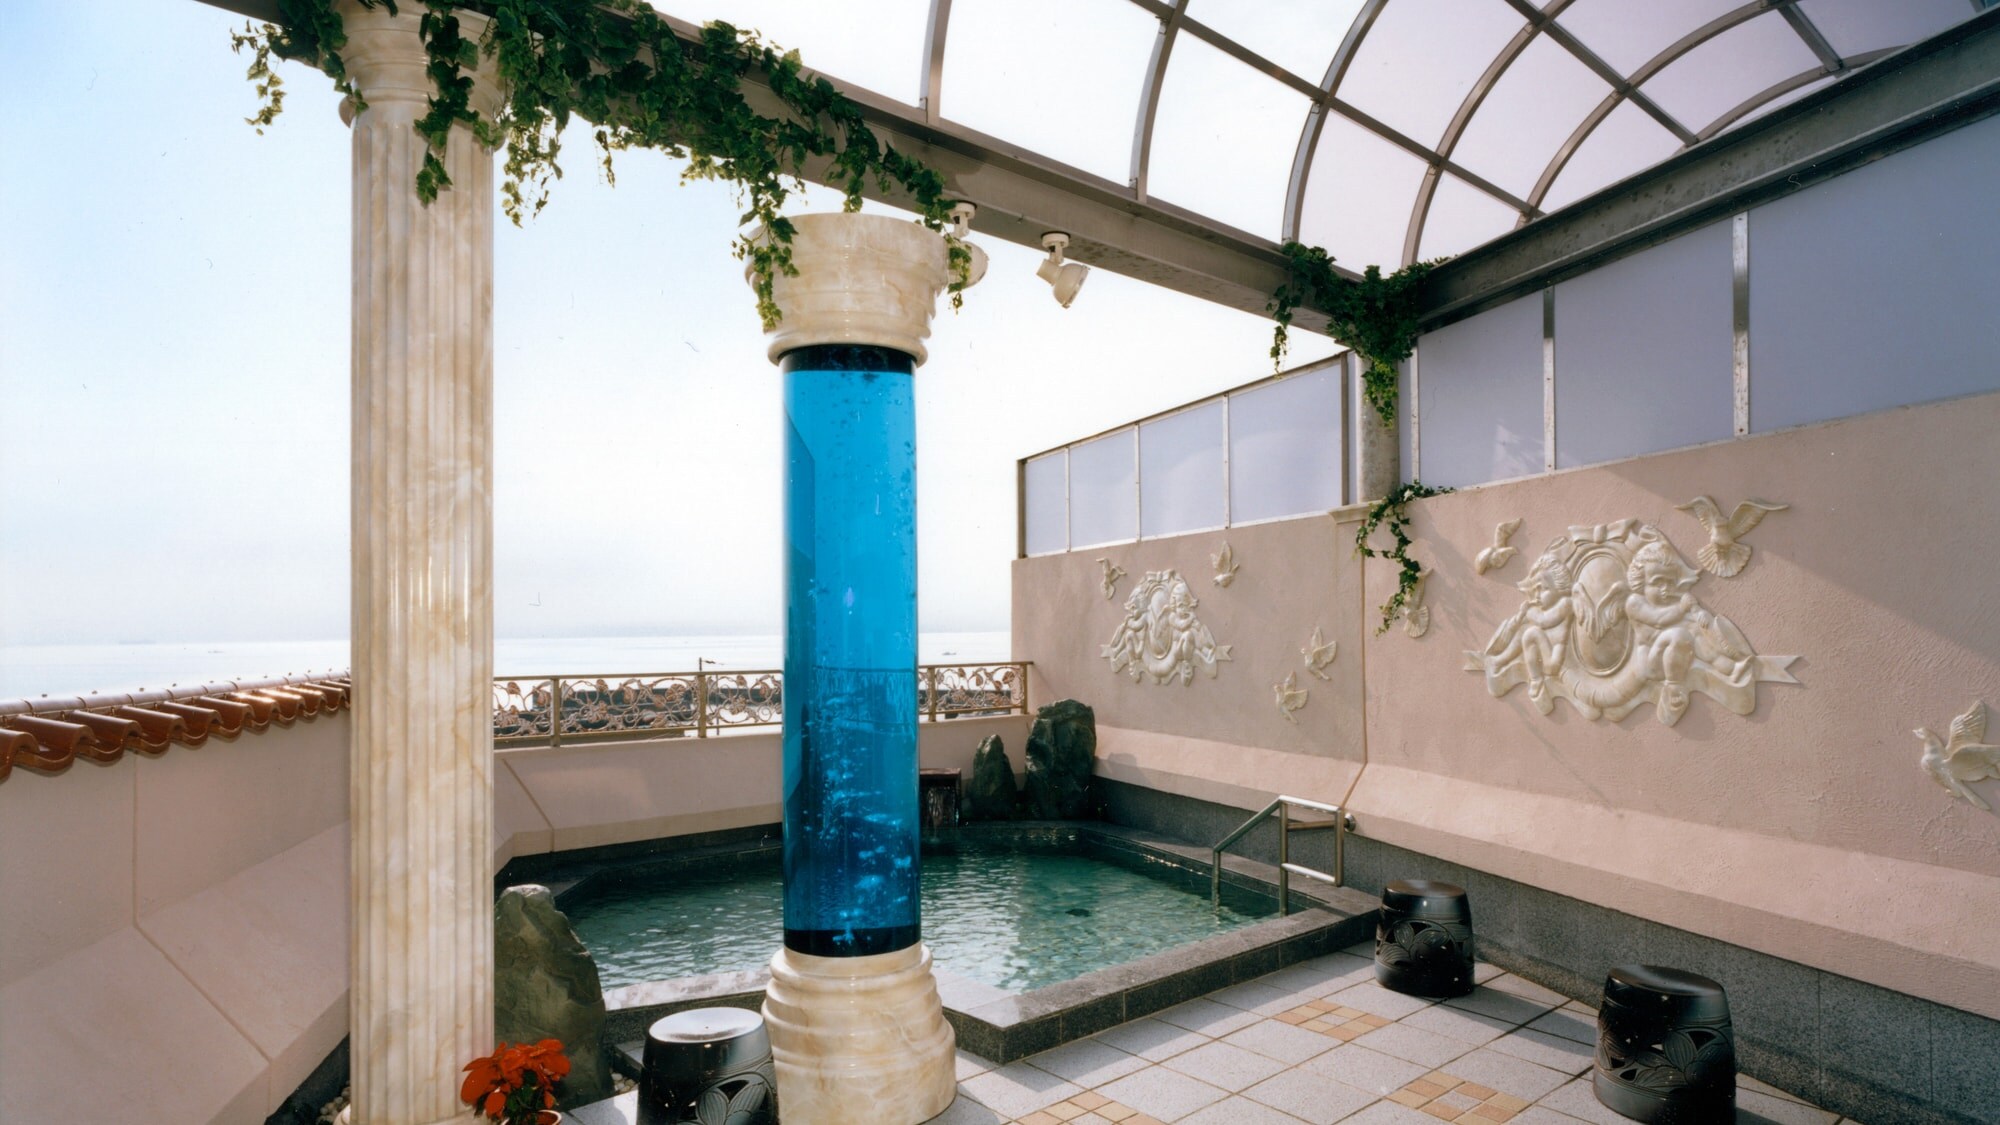 [Open-air bath for men] An open-air bath with a good panorama overlooking the sea